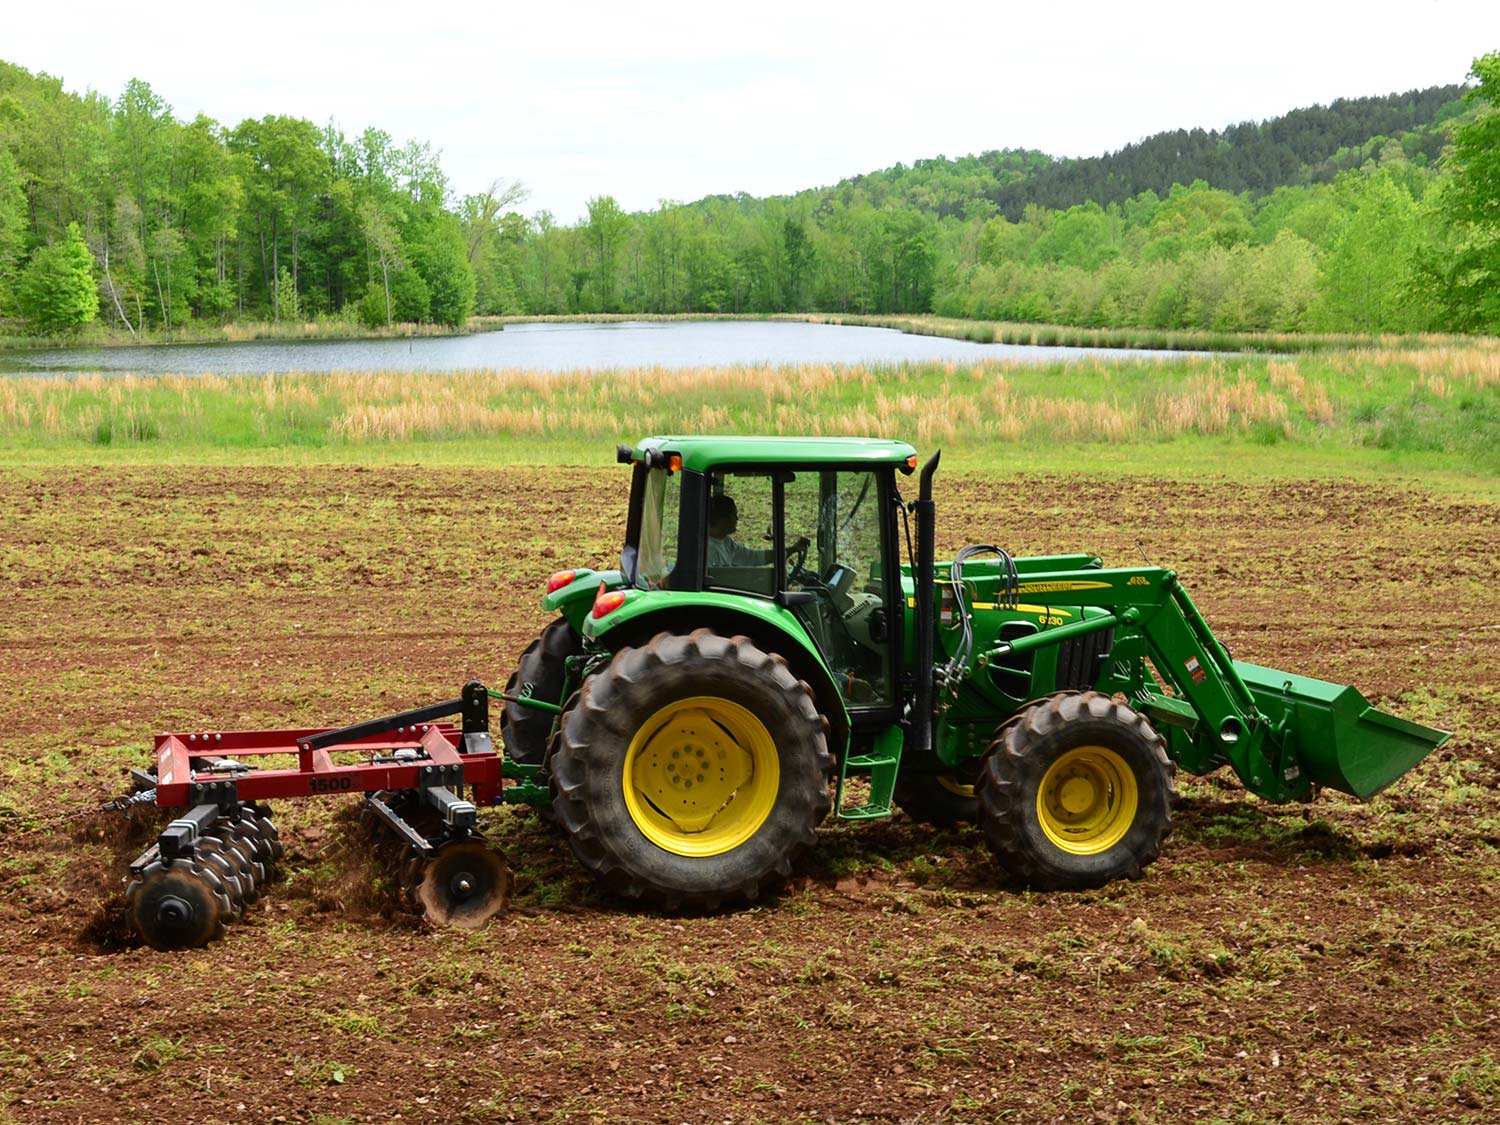 A tractor equipped with a disc tiller plows through a field.